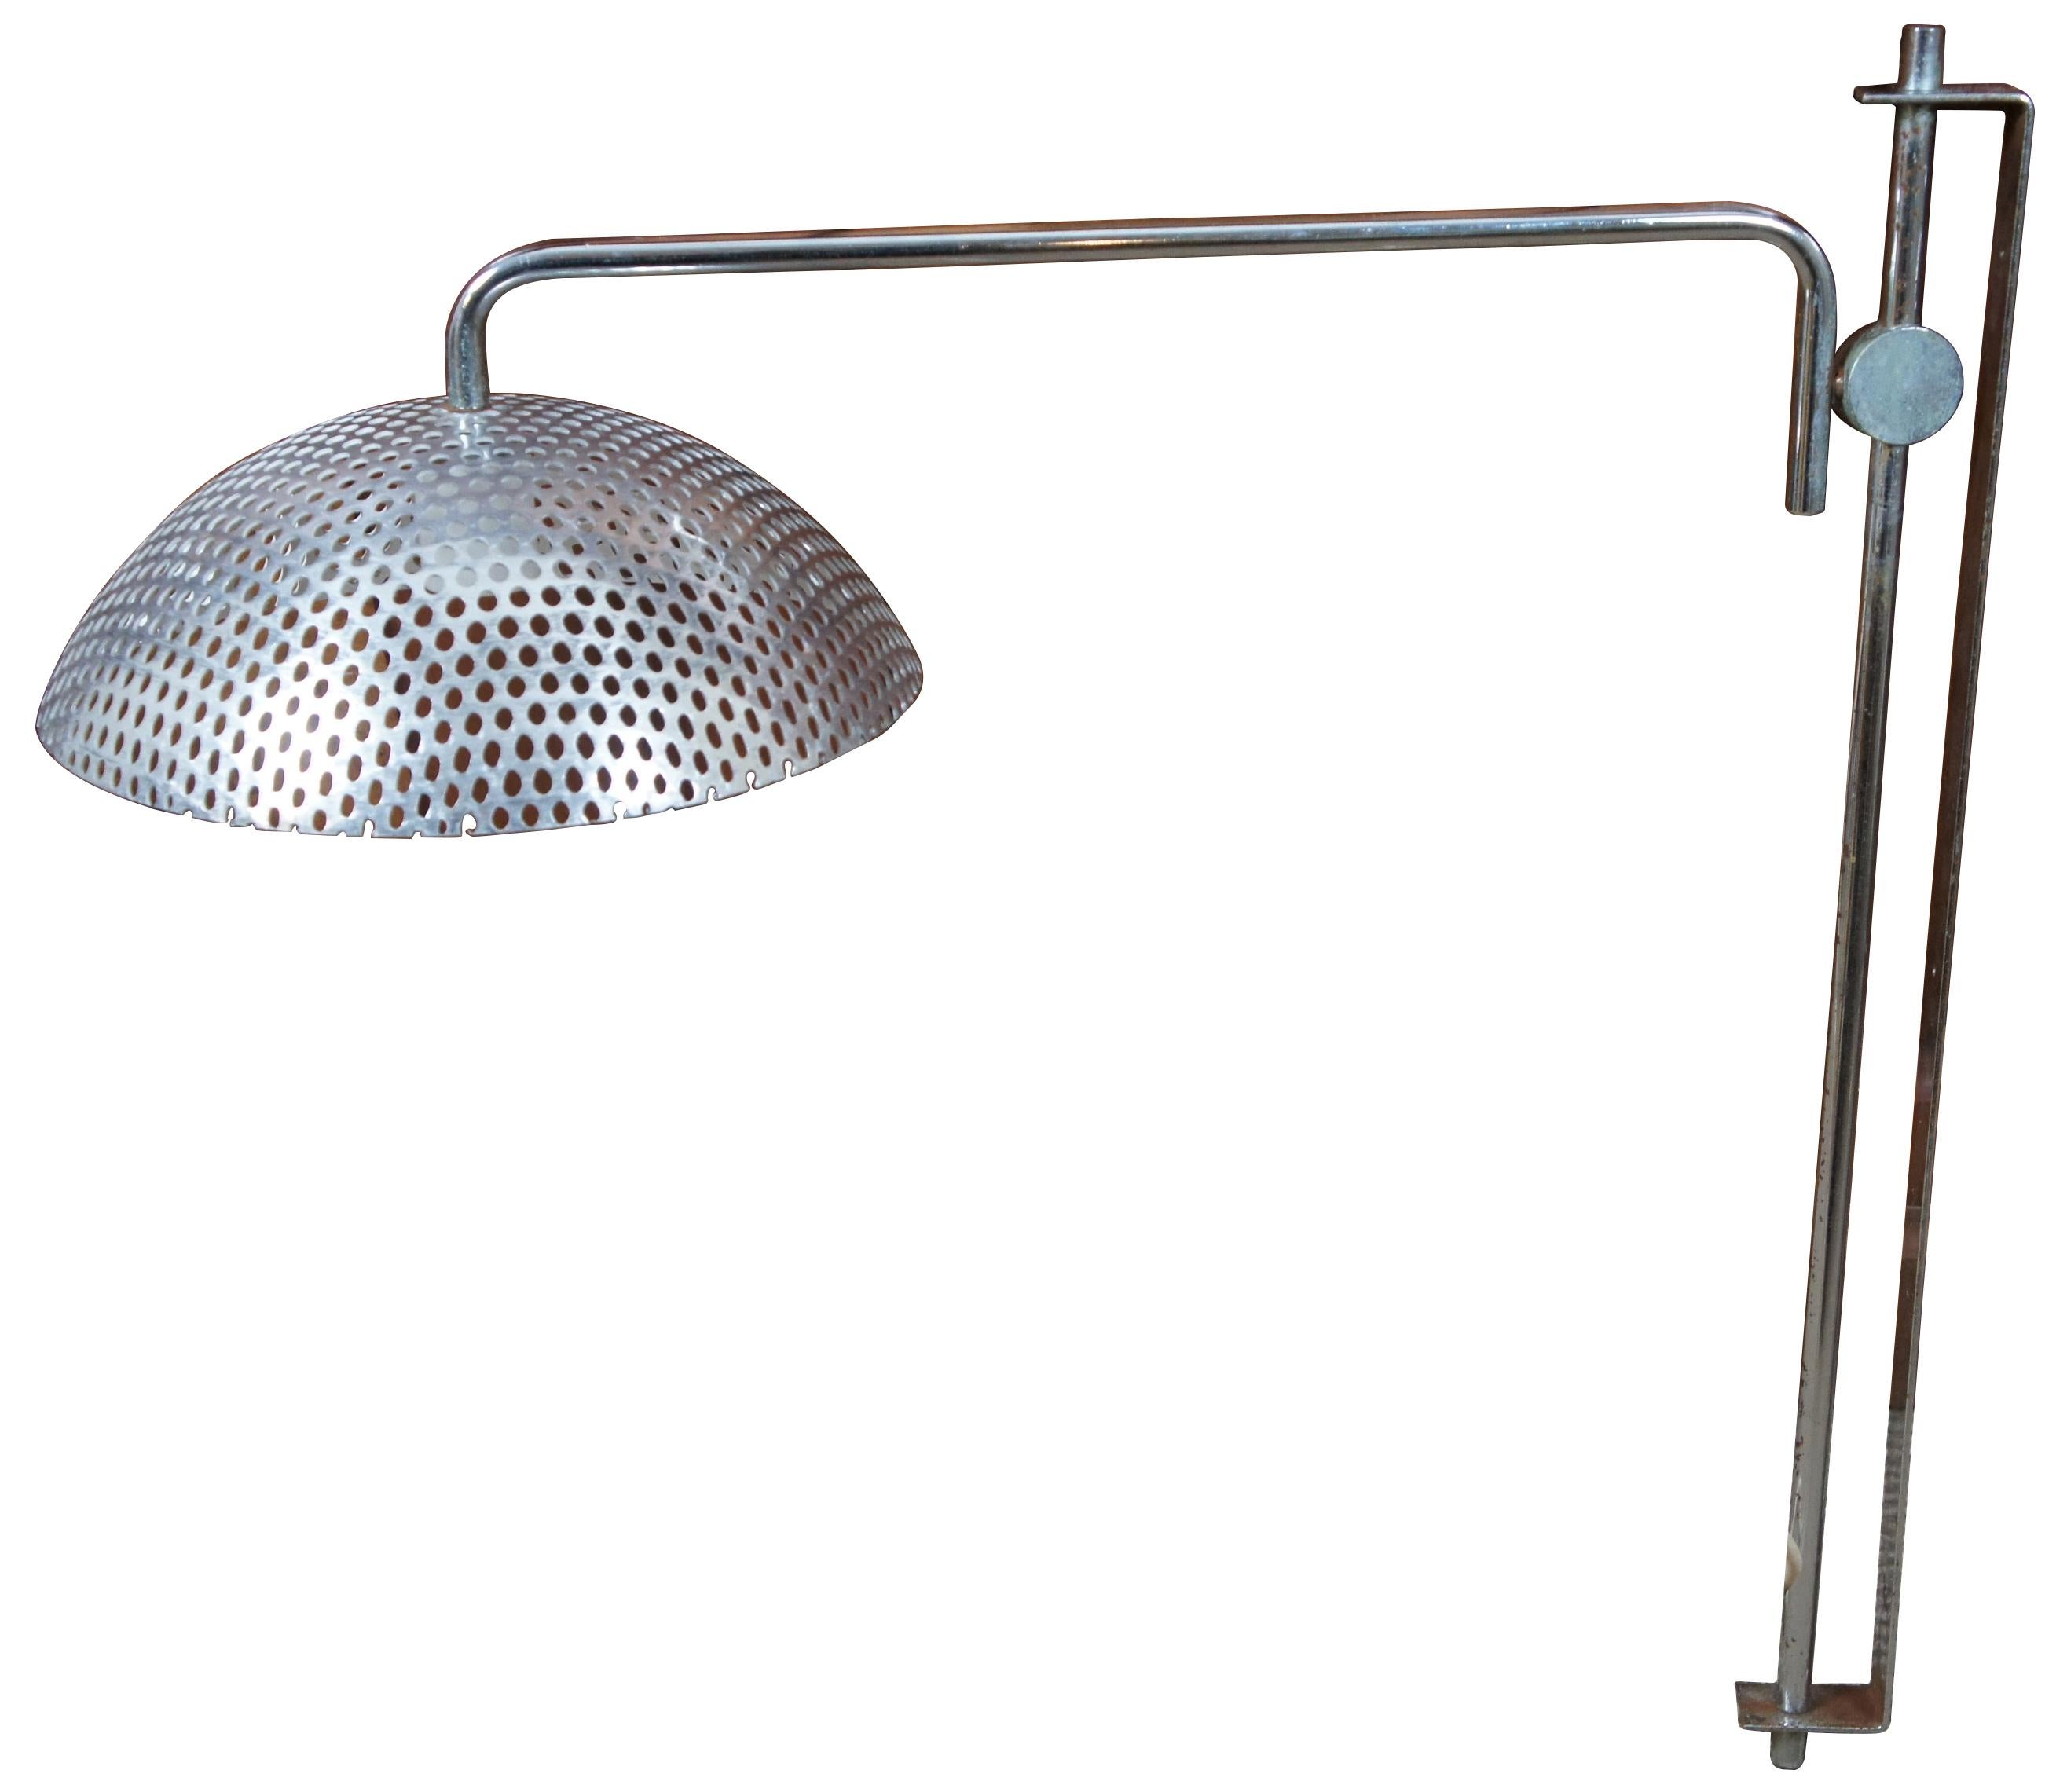 Vintage midcentury wall mounted, swiveling industrial style chrome and perforated steel work light.
   